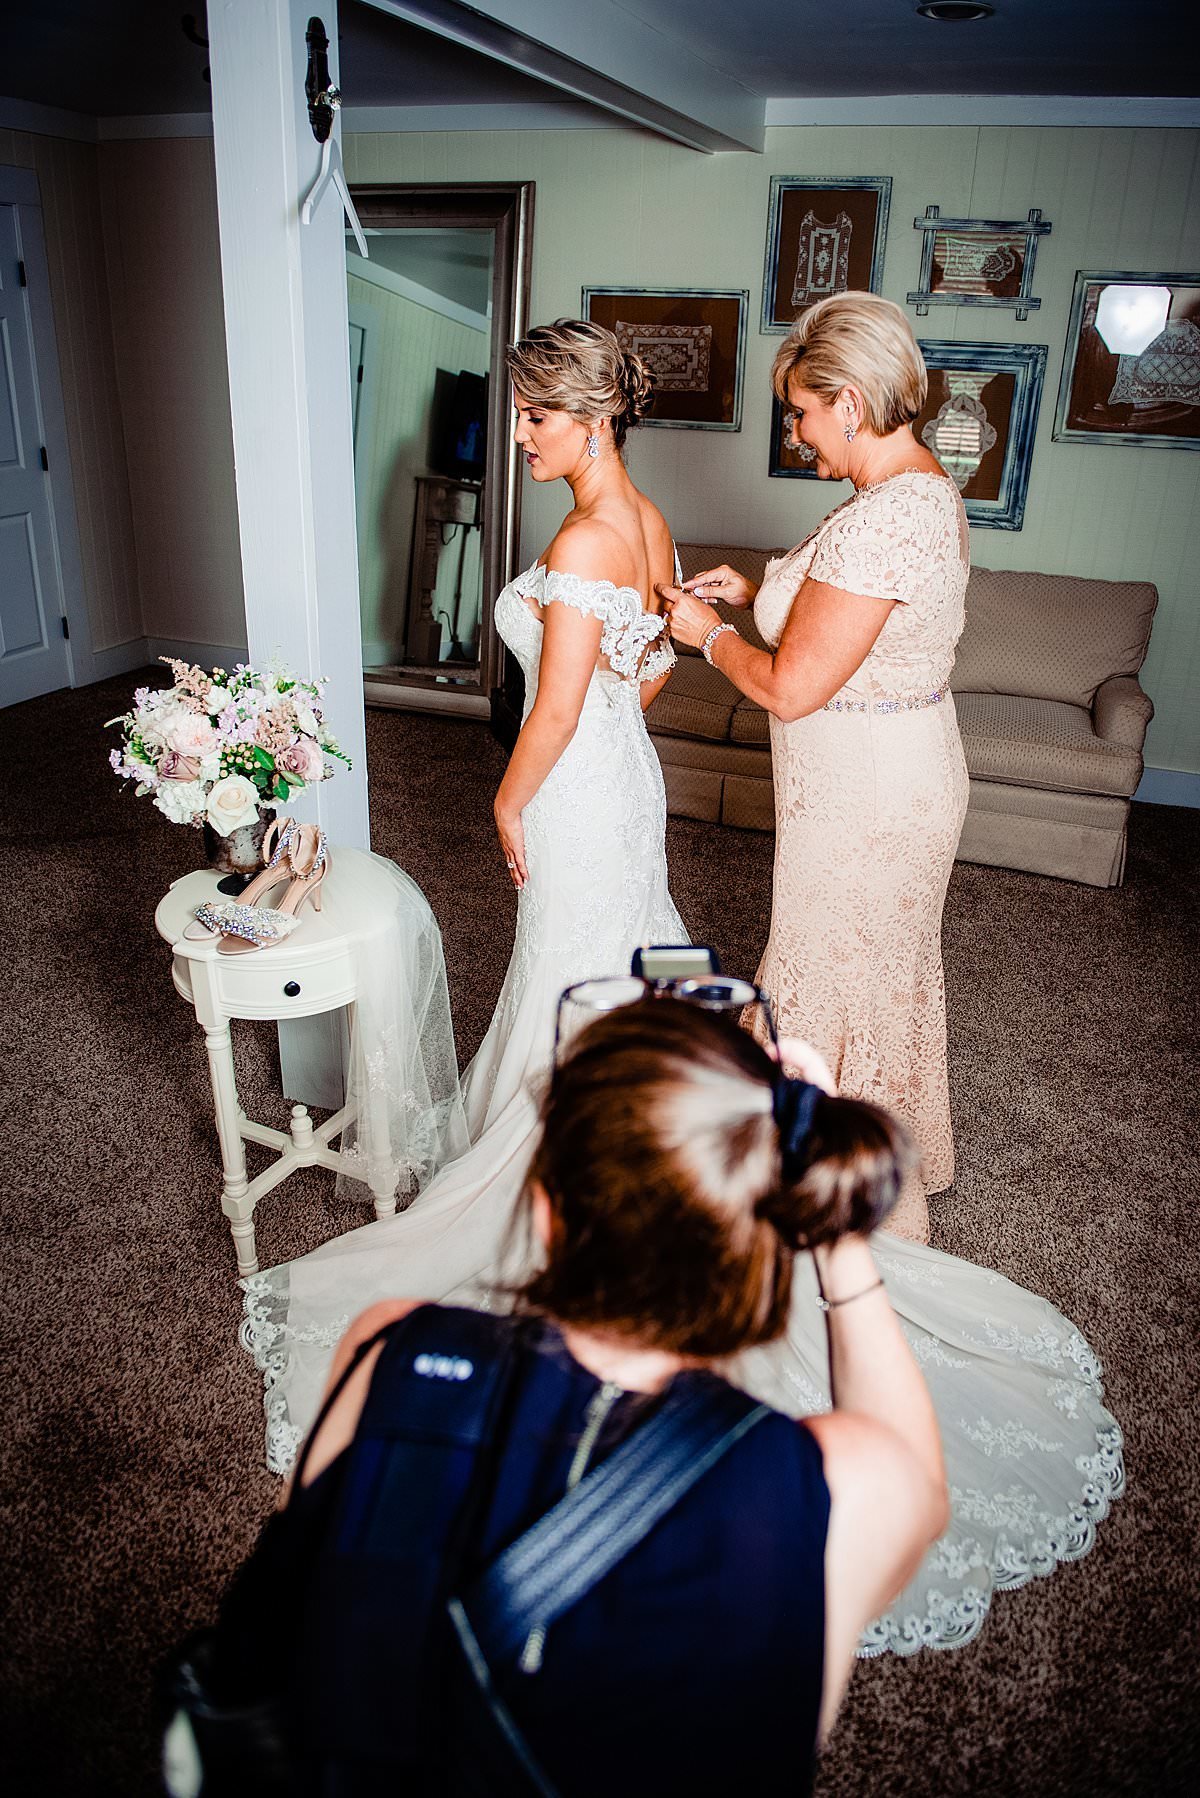 Behind the scenes photo of photographer taking pictures of brides mother buttoning up her dress in the bridal suite at Saddlewoods Farm